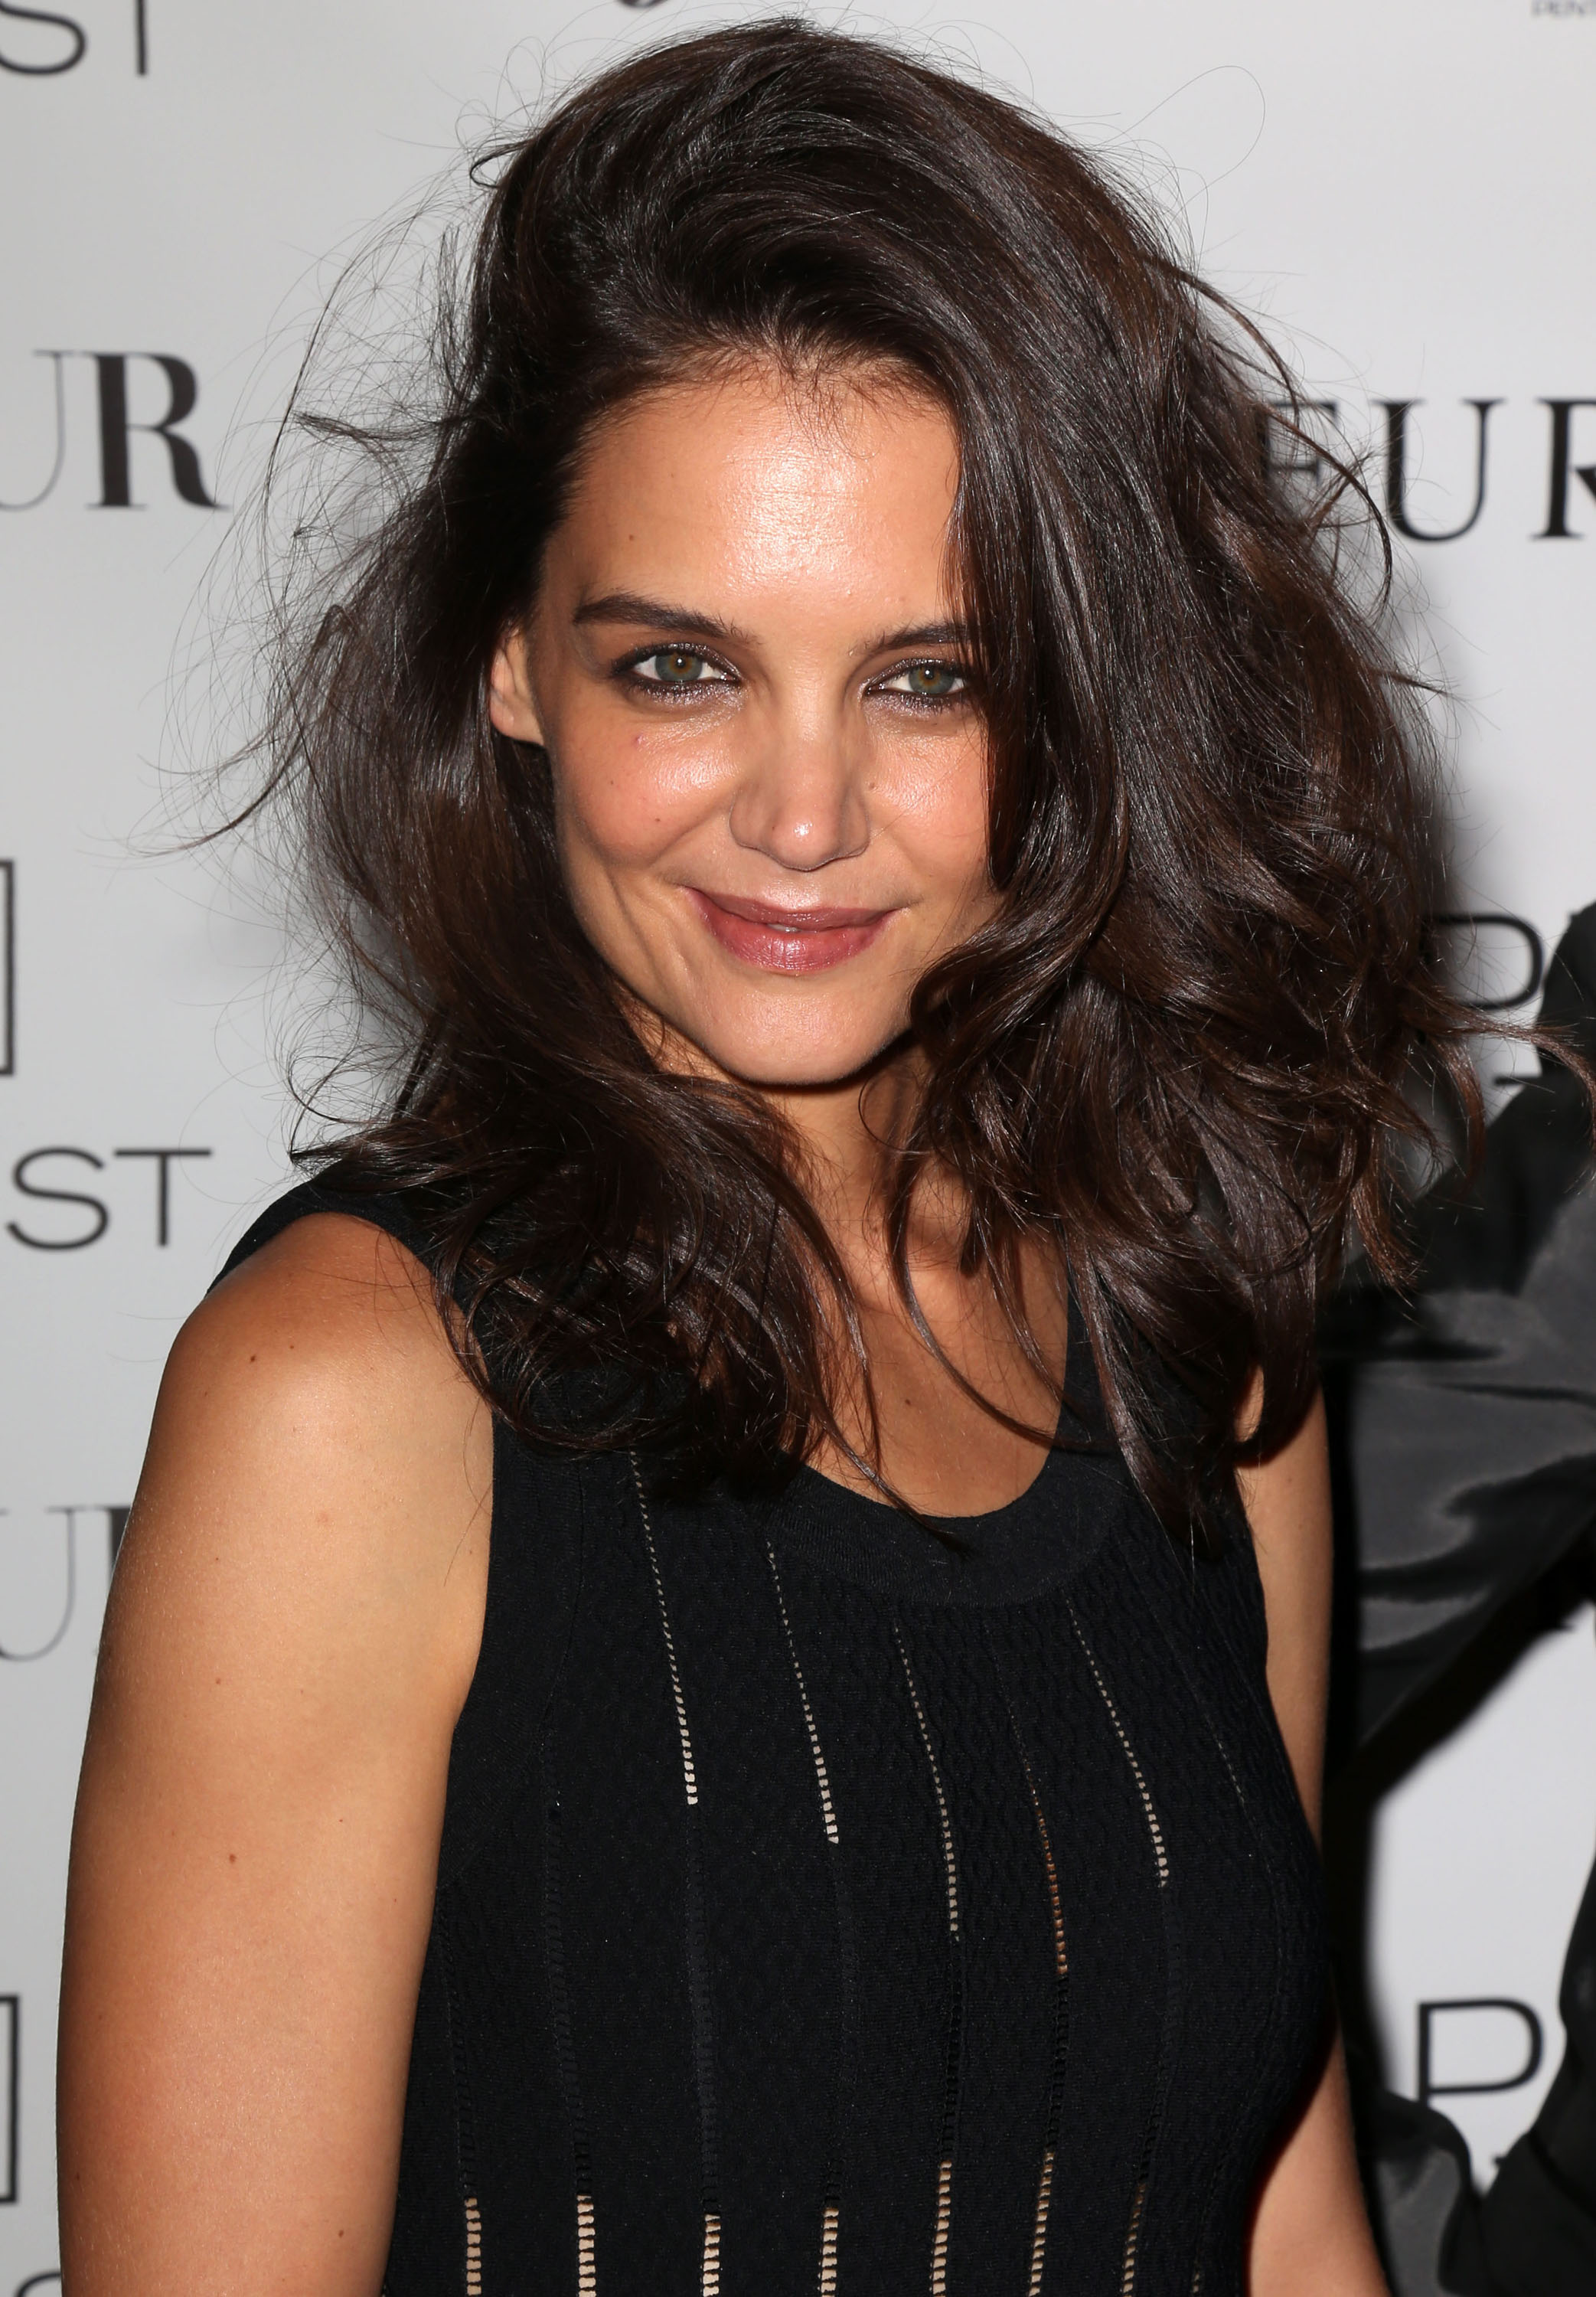 Well Played, Katie Holmes